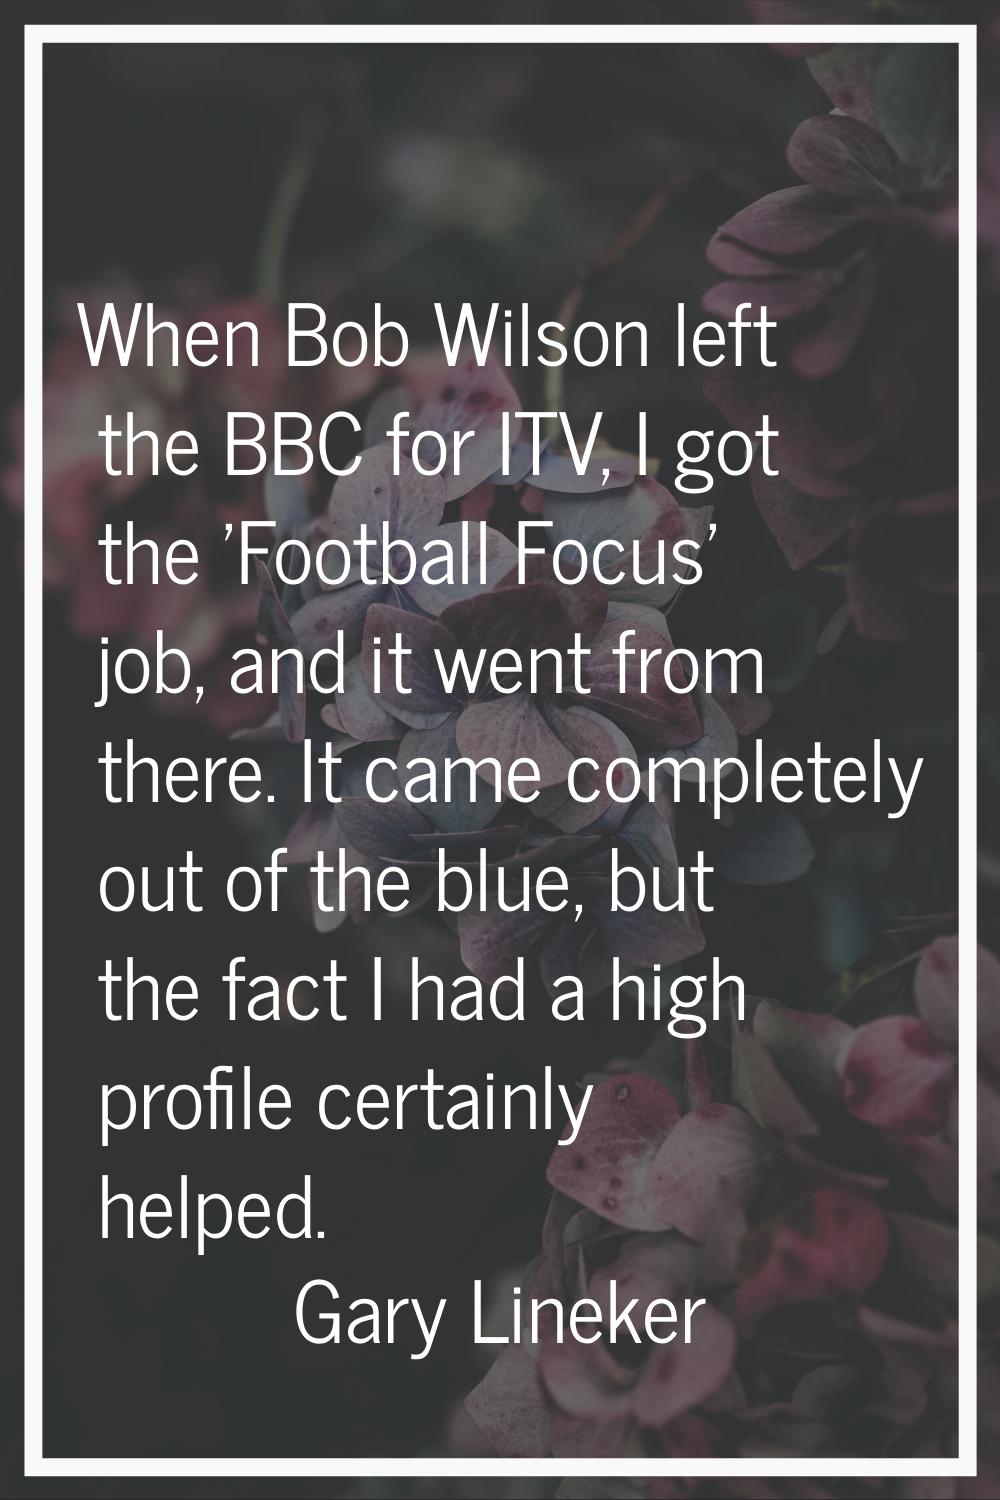 When Bob Wilson left the BBC for ITV, I got the 'Football Focus' job, and it went from there. It ca